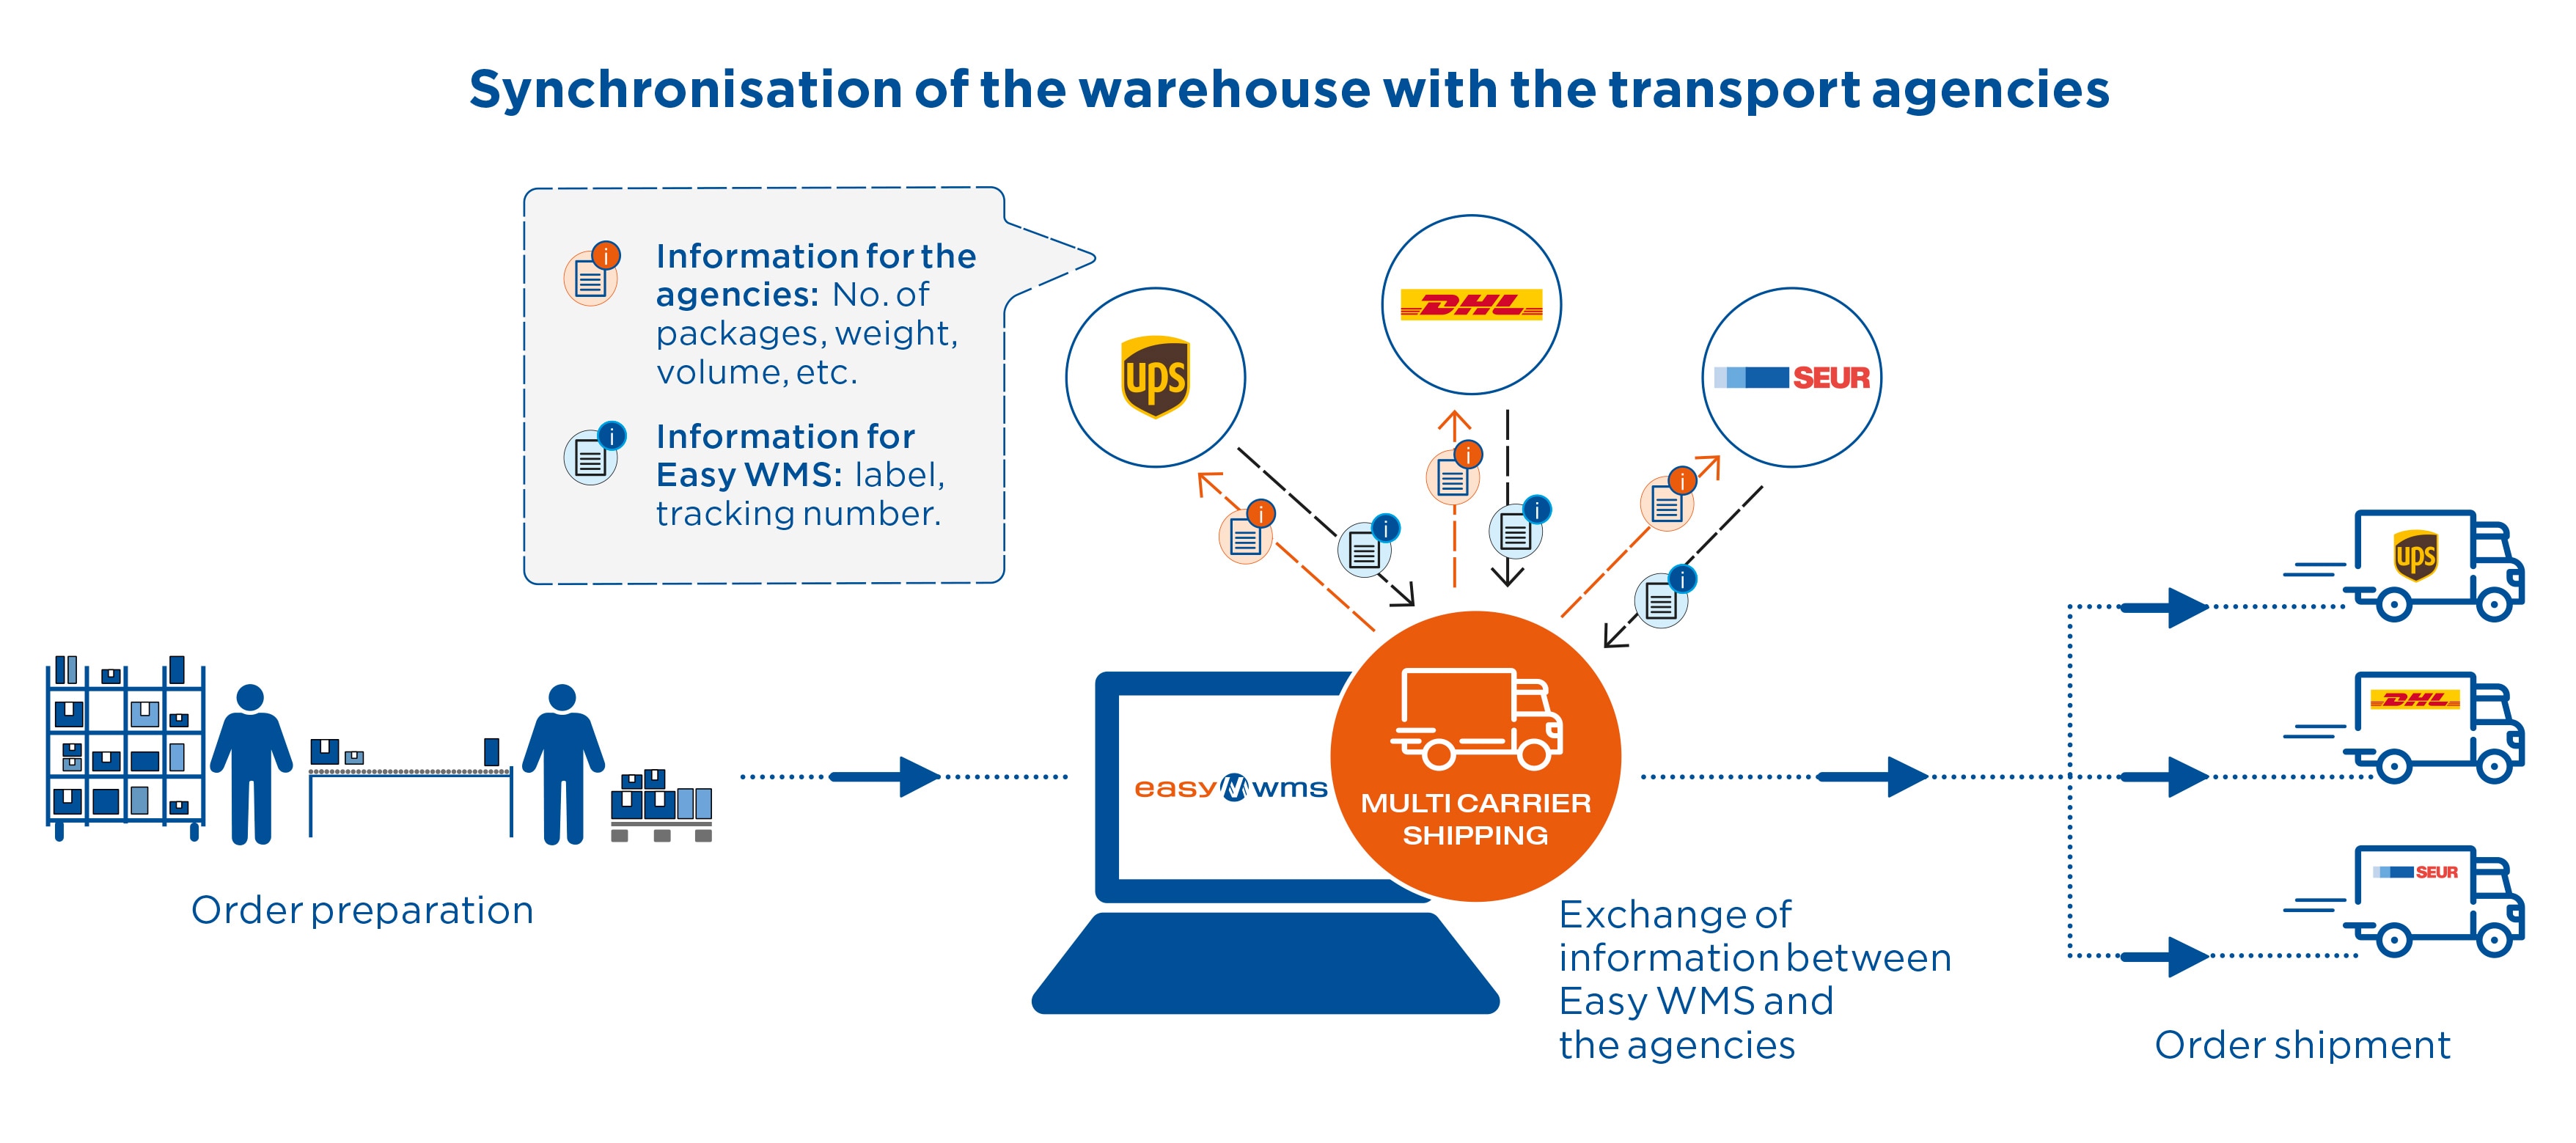 Synchronisation of the warehouse with the transport agencies